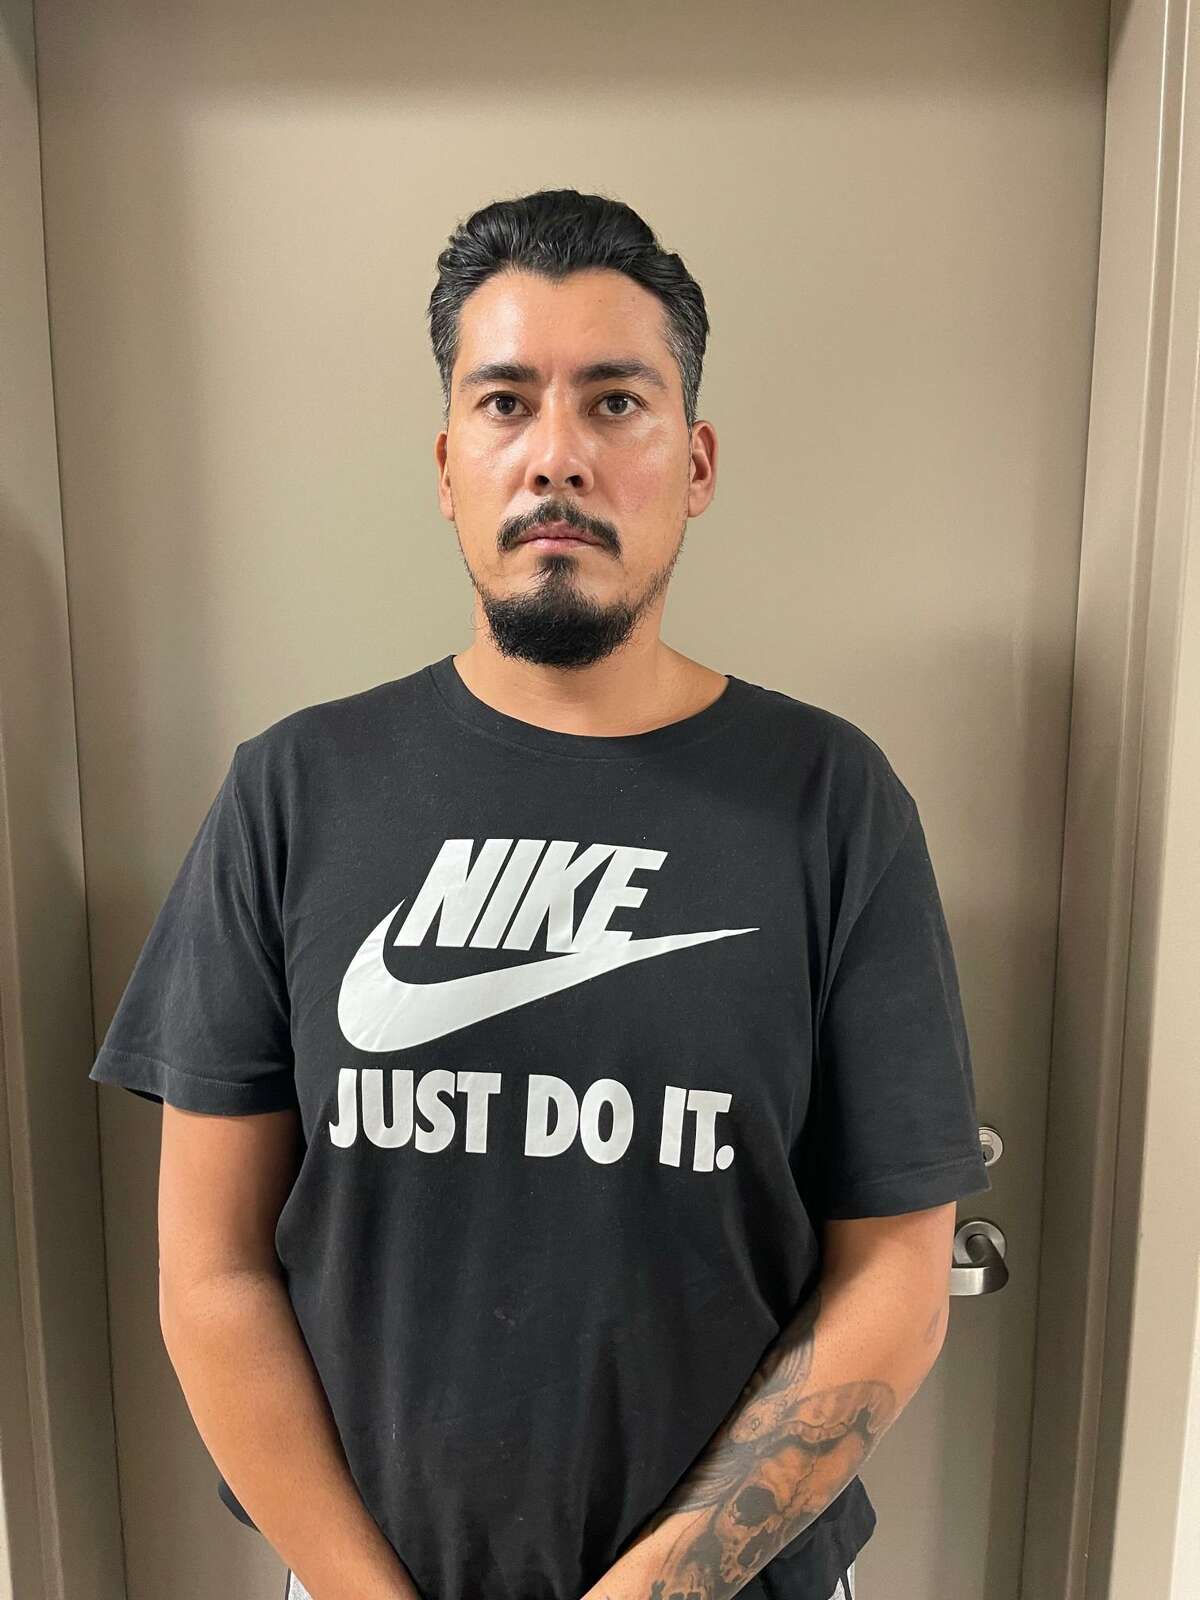 Francisco Velasquez, 37, was extradited on April 11, 2022, from Mexico to Bexar County, where he failed to appear for a murder trial in August 2021.